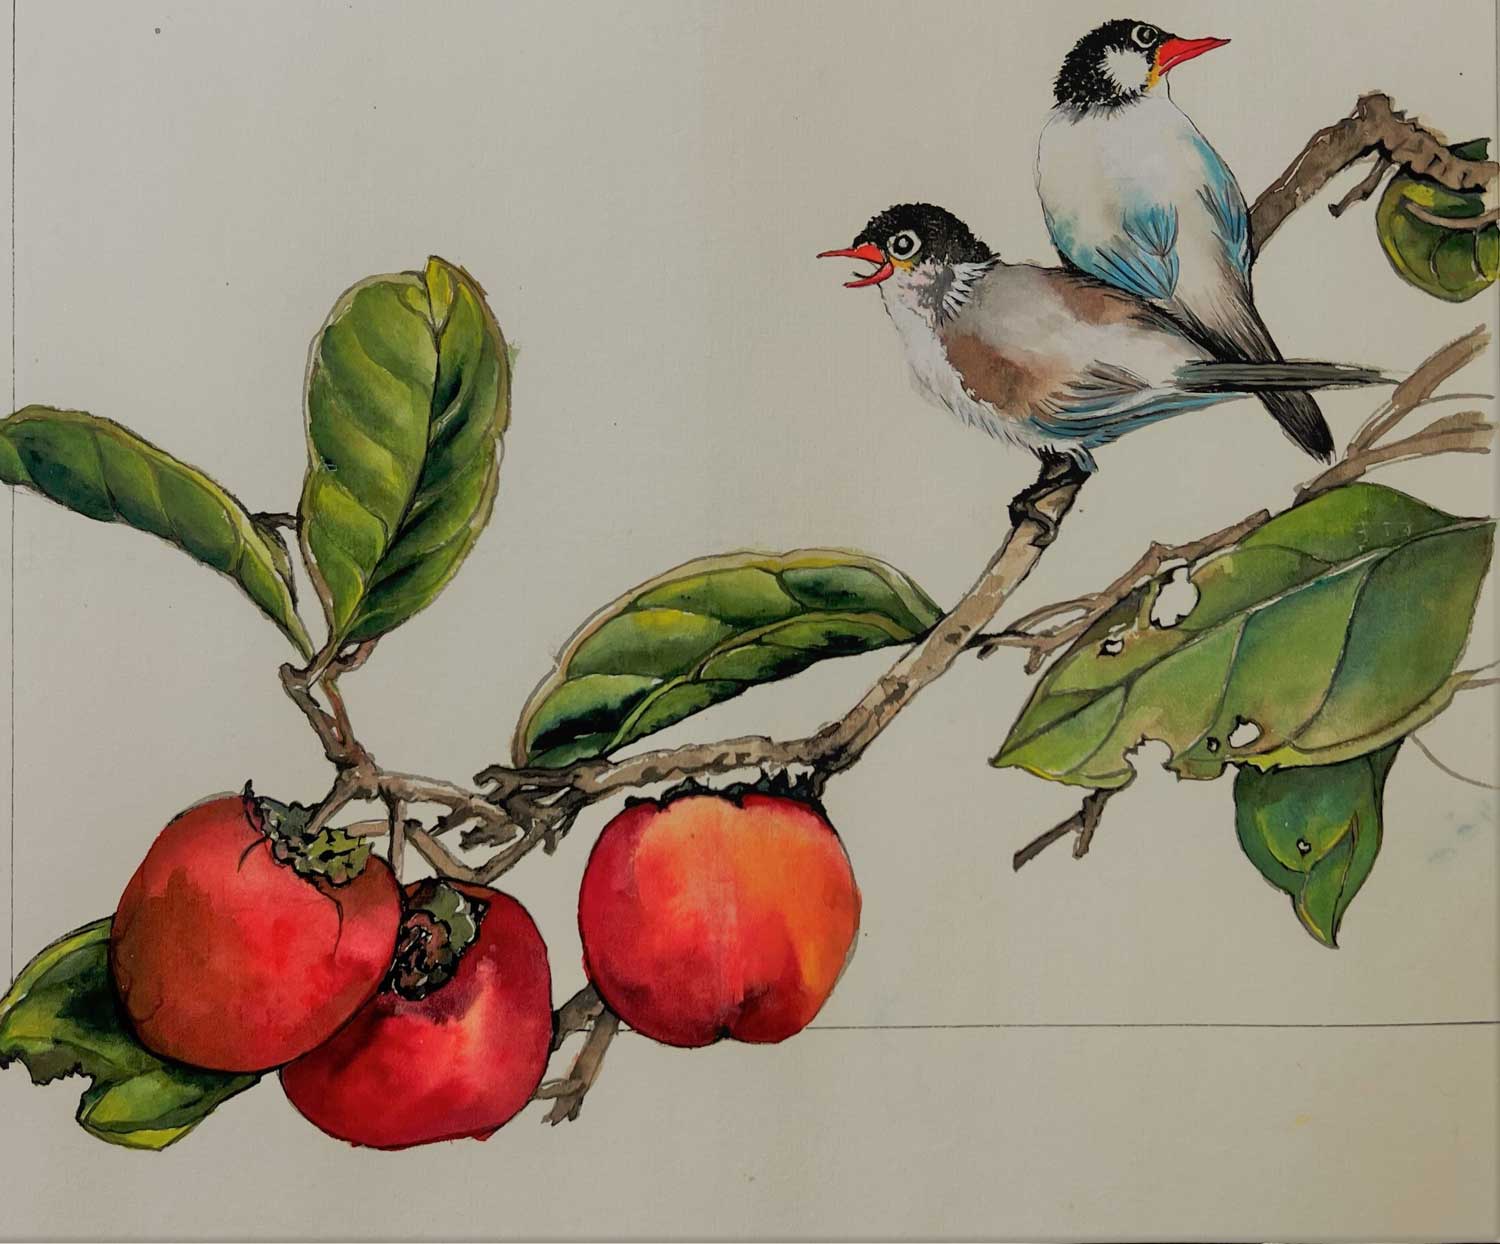 A traditional Chinese-style painting of two birds perched on a branch of an apple tree. The birds are depicted in black, blue, white, and brown, with vibrant red beaks that match the color of the ripe apples on the branch. The painting is done on Chinese painting paper, with delicate and precise brushstrokes capturing the details of the birds and the apple tree branch. The birds are depicted in a natural and relaxed pose, with their feathers and markings rendered in intricate detail. The background is left largely blank, emphasizing the simplicity and elegance of the composition. Overall, the painting exudes a sense of tranquility and balance, capturing the beauty of nature in a traditional and timeless way.